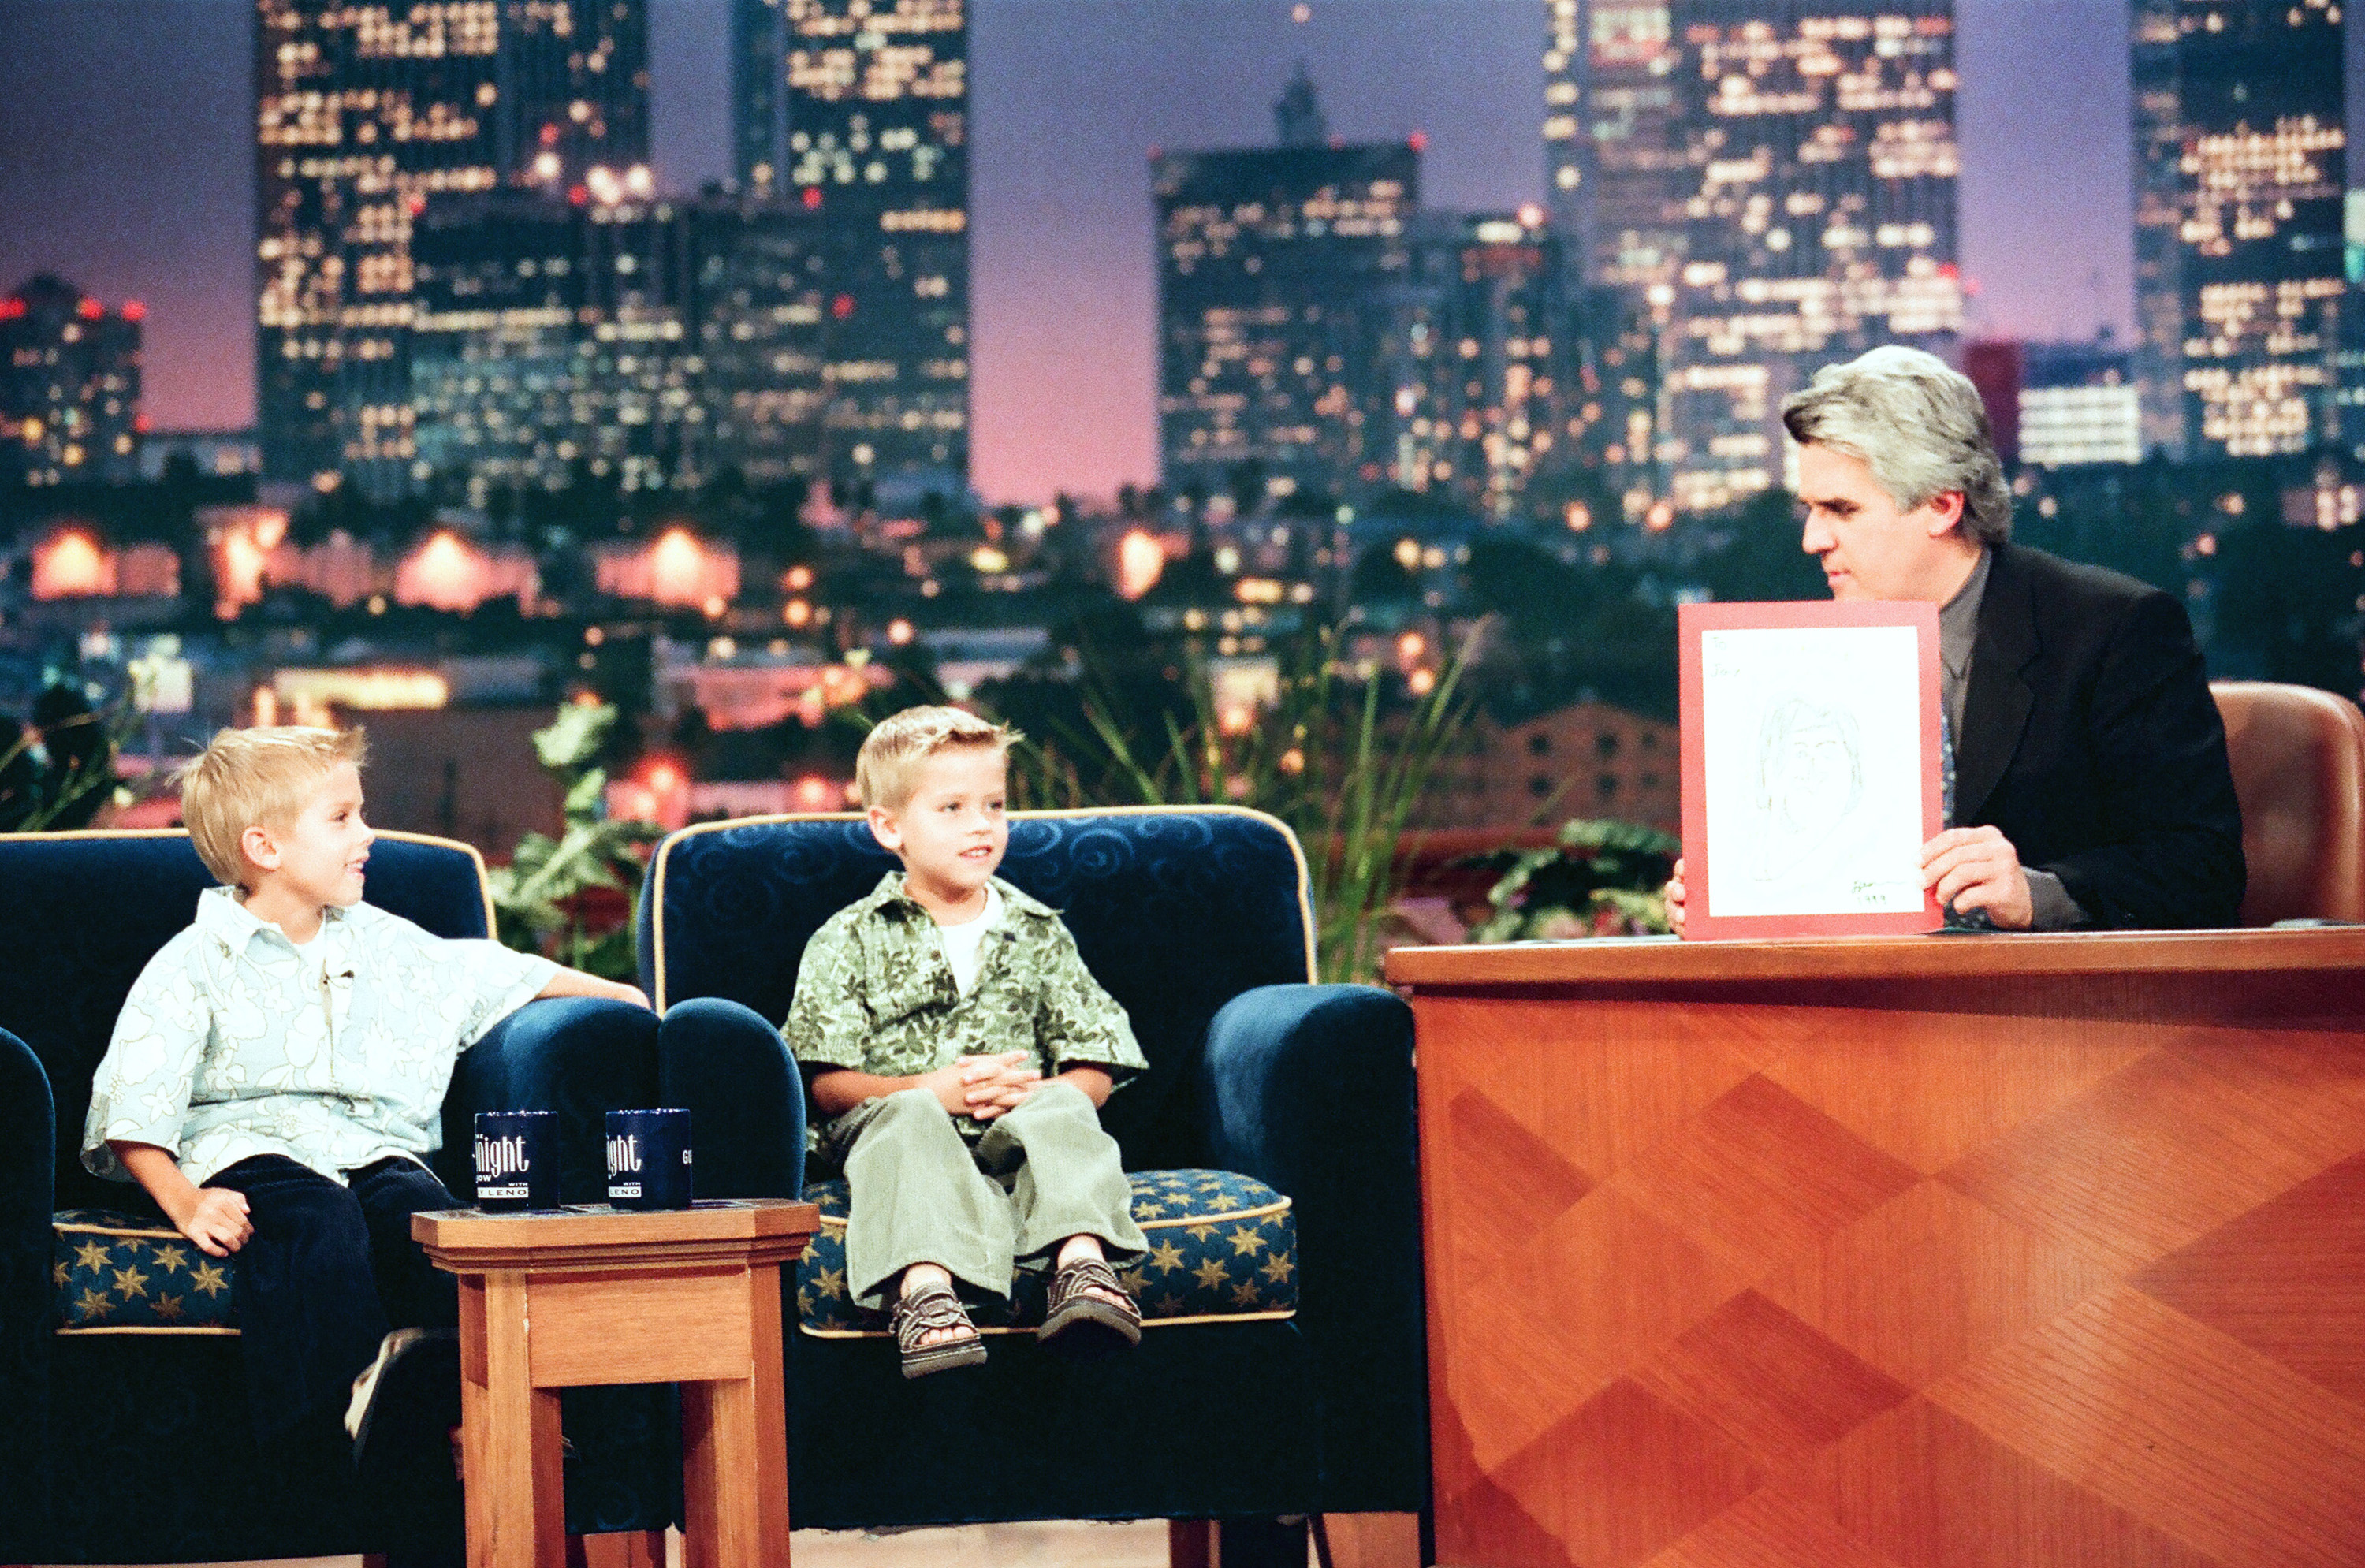 [Von rechts nach links] Jay Leno, Dylan und Cole Sprouse in Folge 151460 der "The Tonight Show with Jay Leno", am 18. Juni 1999. | Quelle: Getty Images